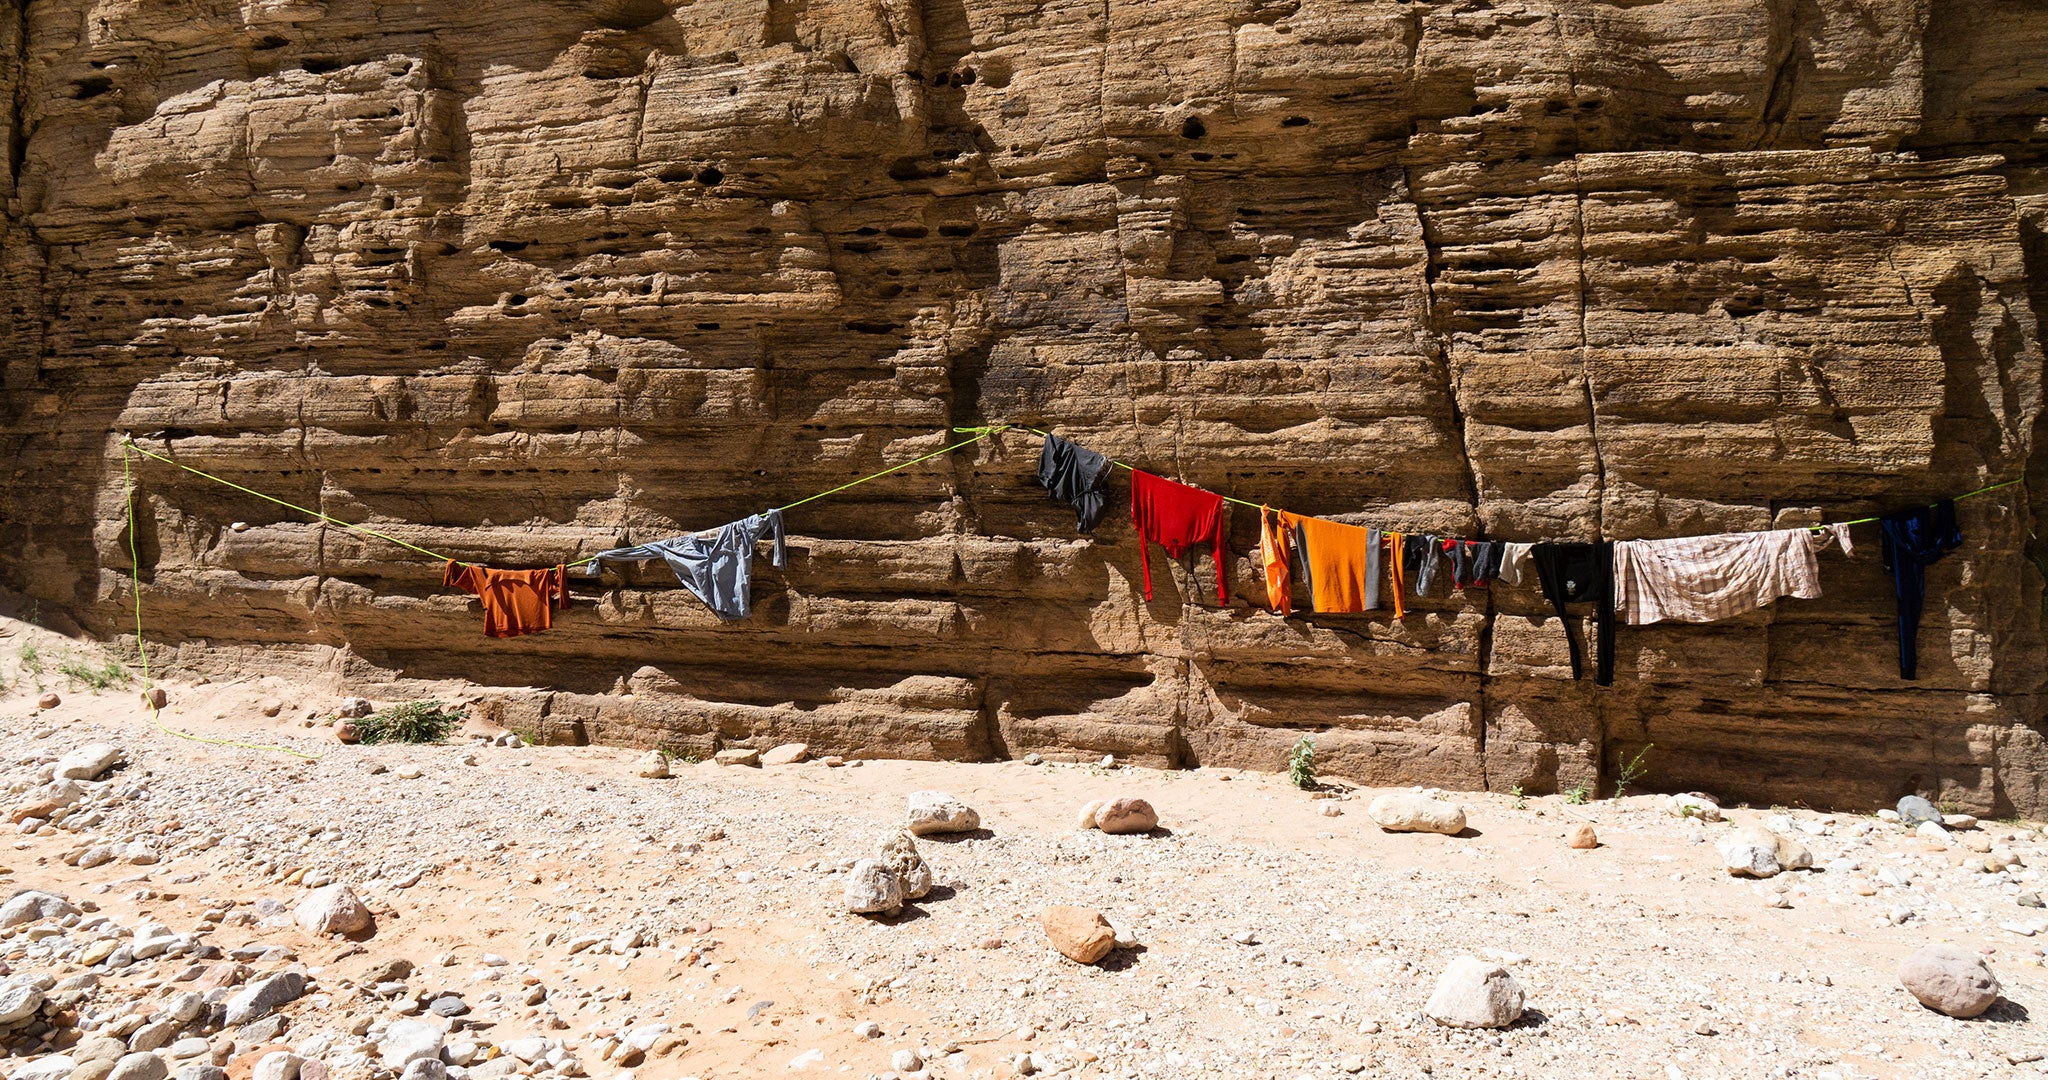 Hiking clothes hanging on a makeshift clothesline made of guy line